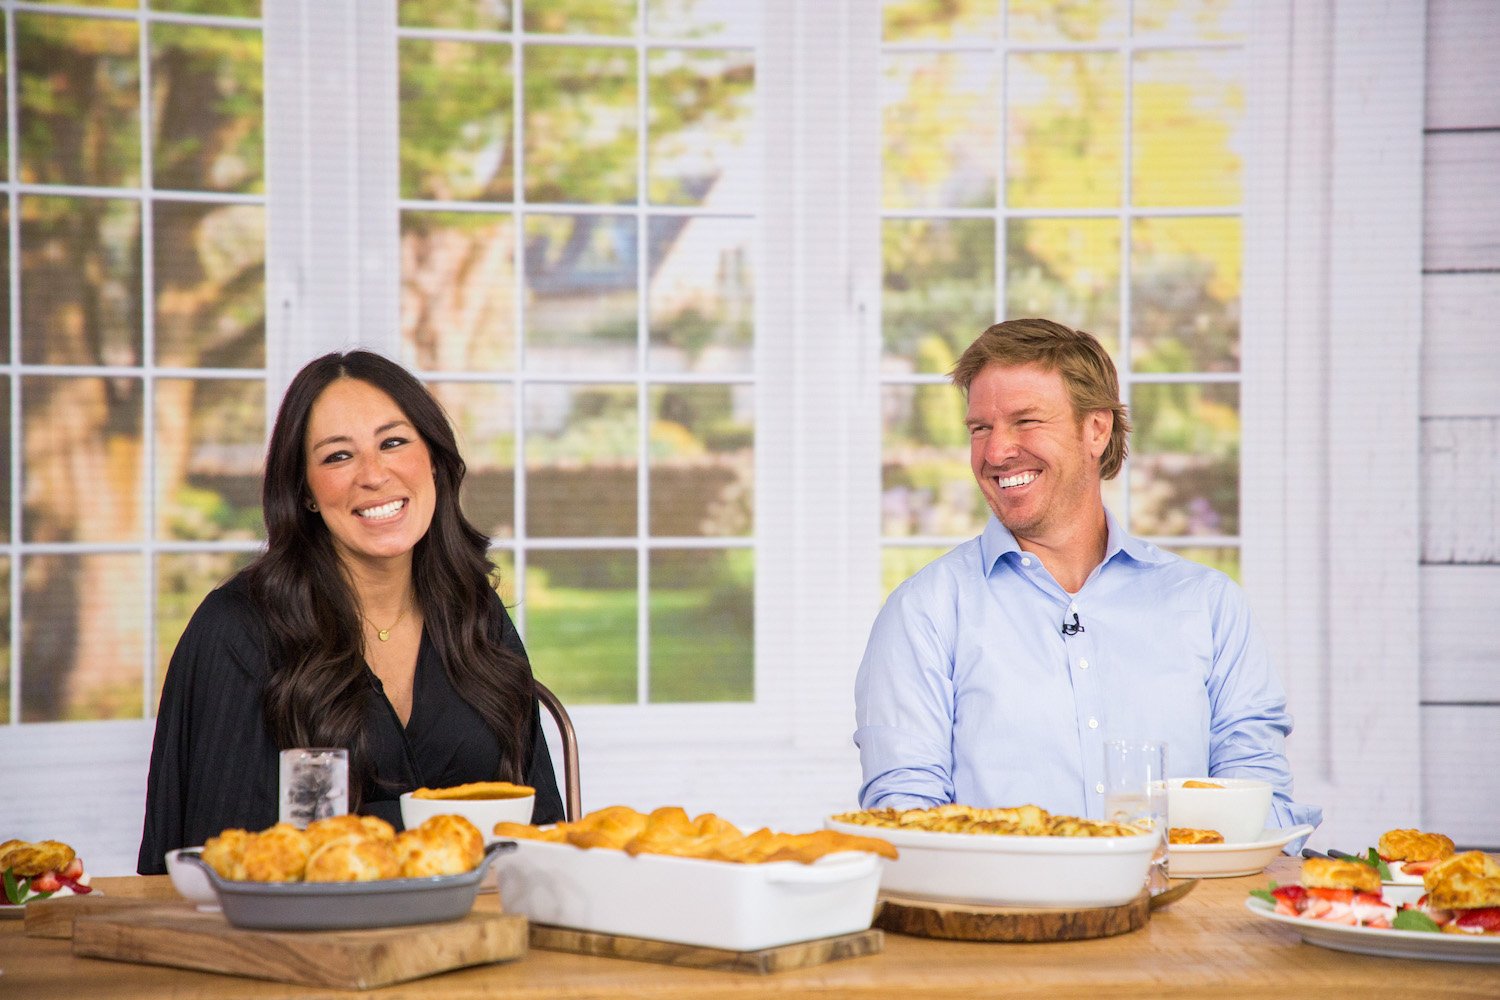 Joanna Gaines Was Upset With Chip Gaines for Making a Renovation Without Telling Her